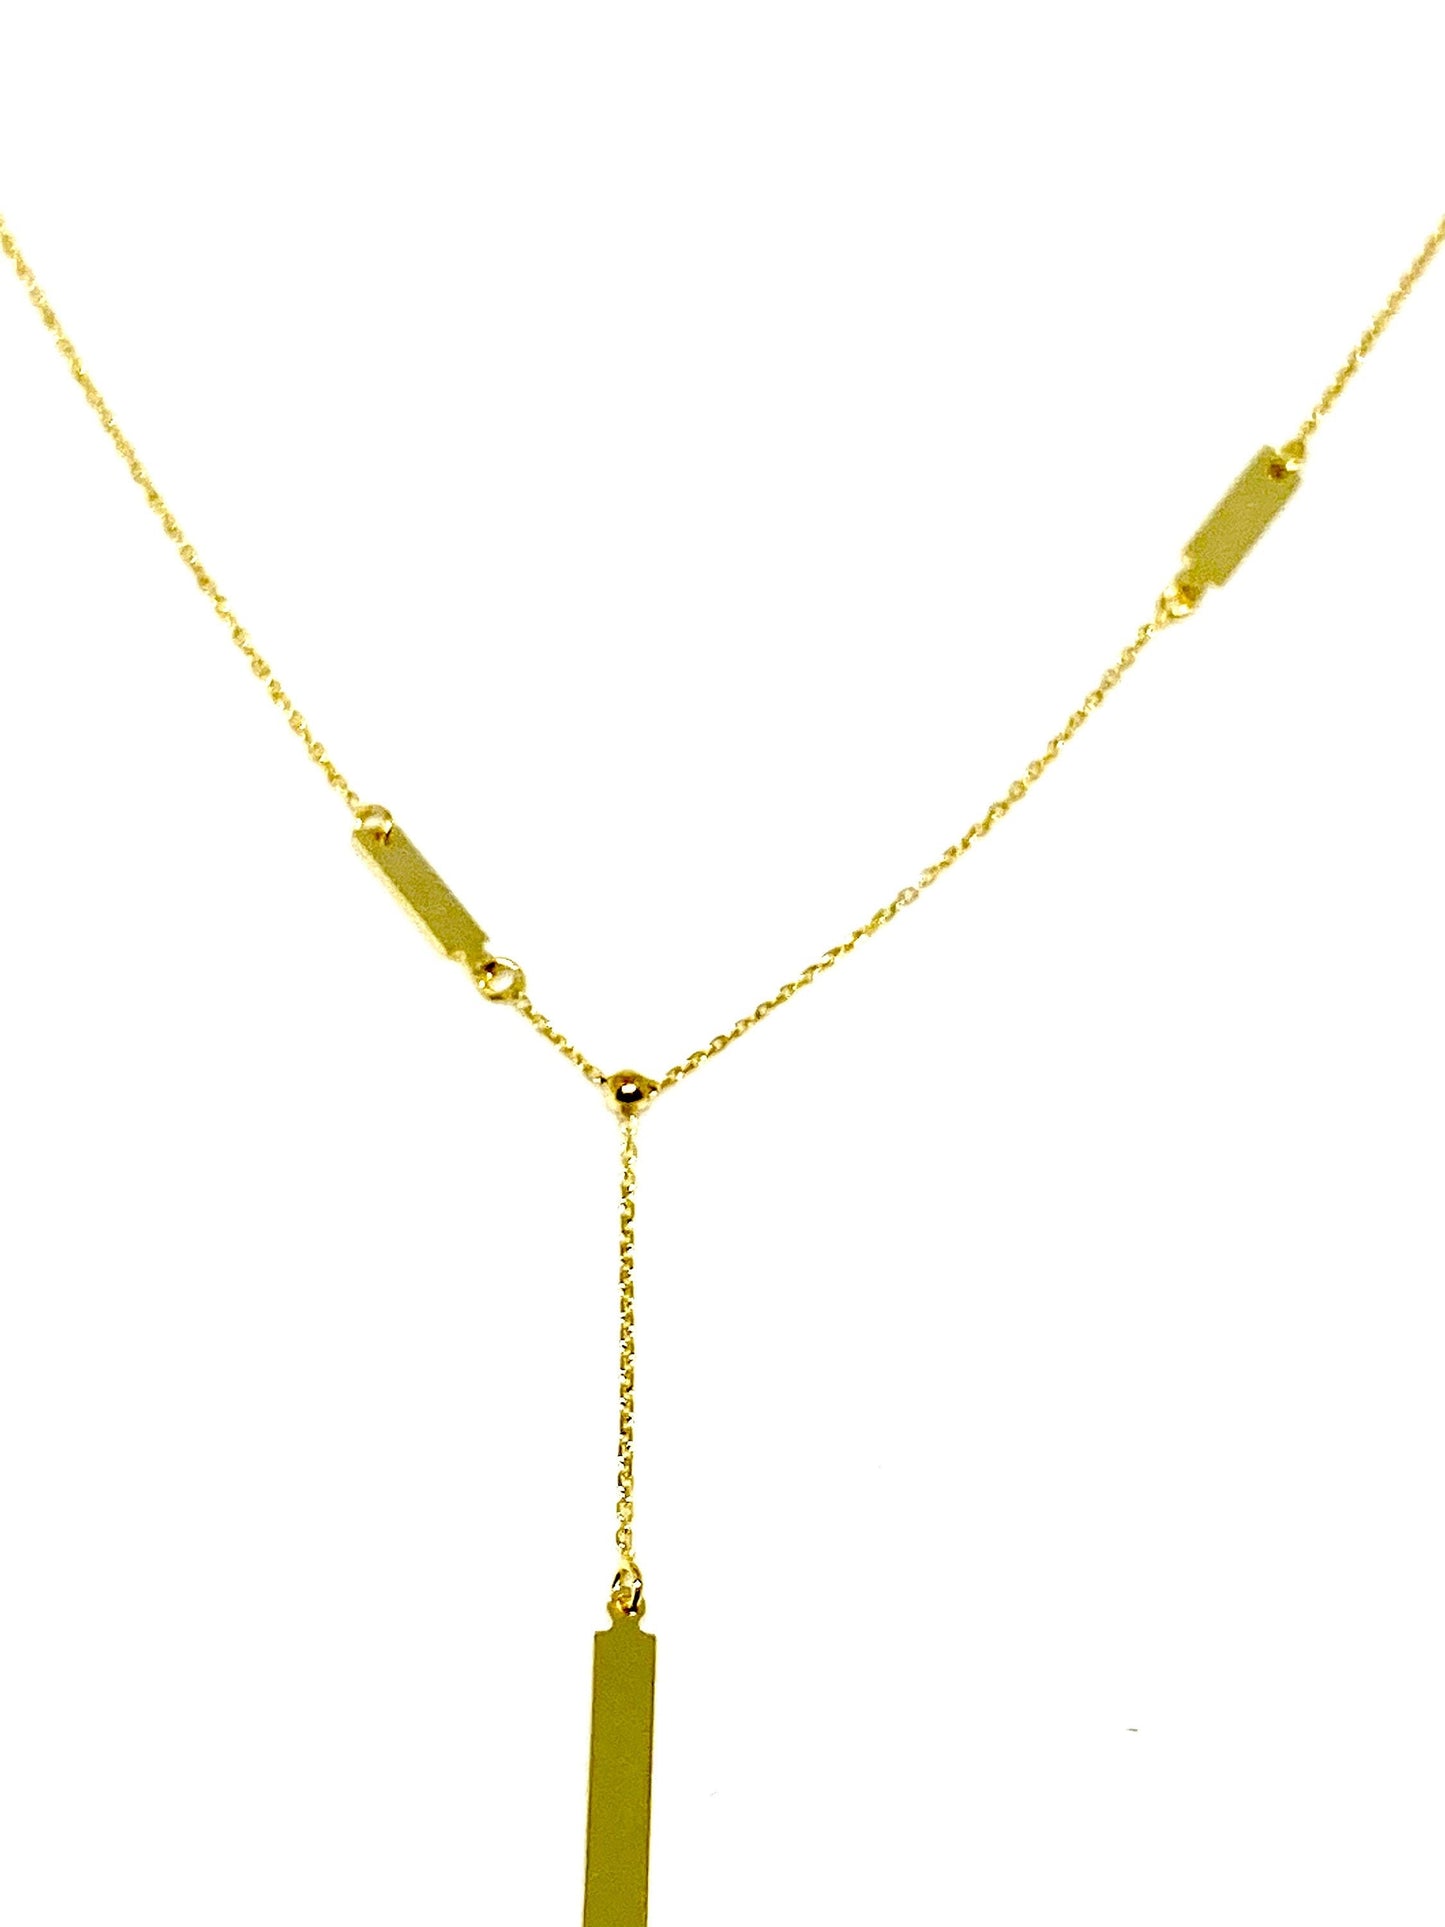 Yellow Gold Bar Station Lariat Pendant Chain Necklace